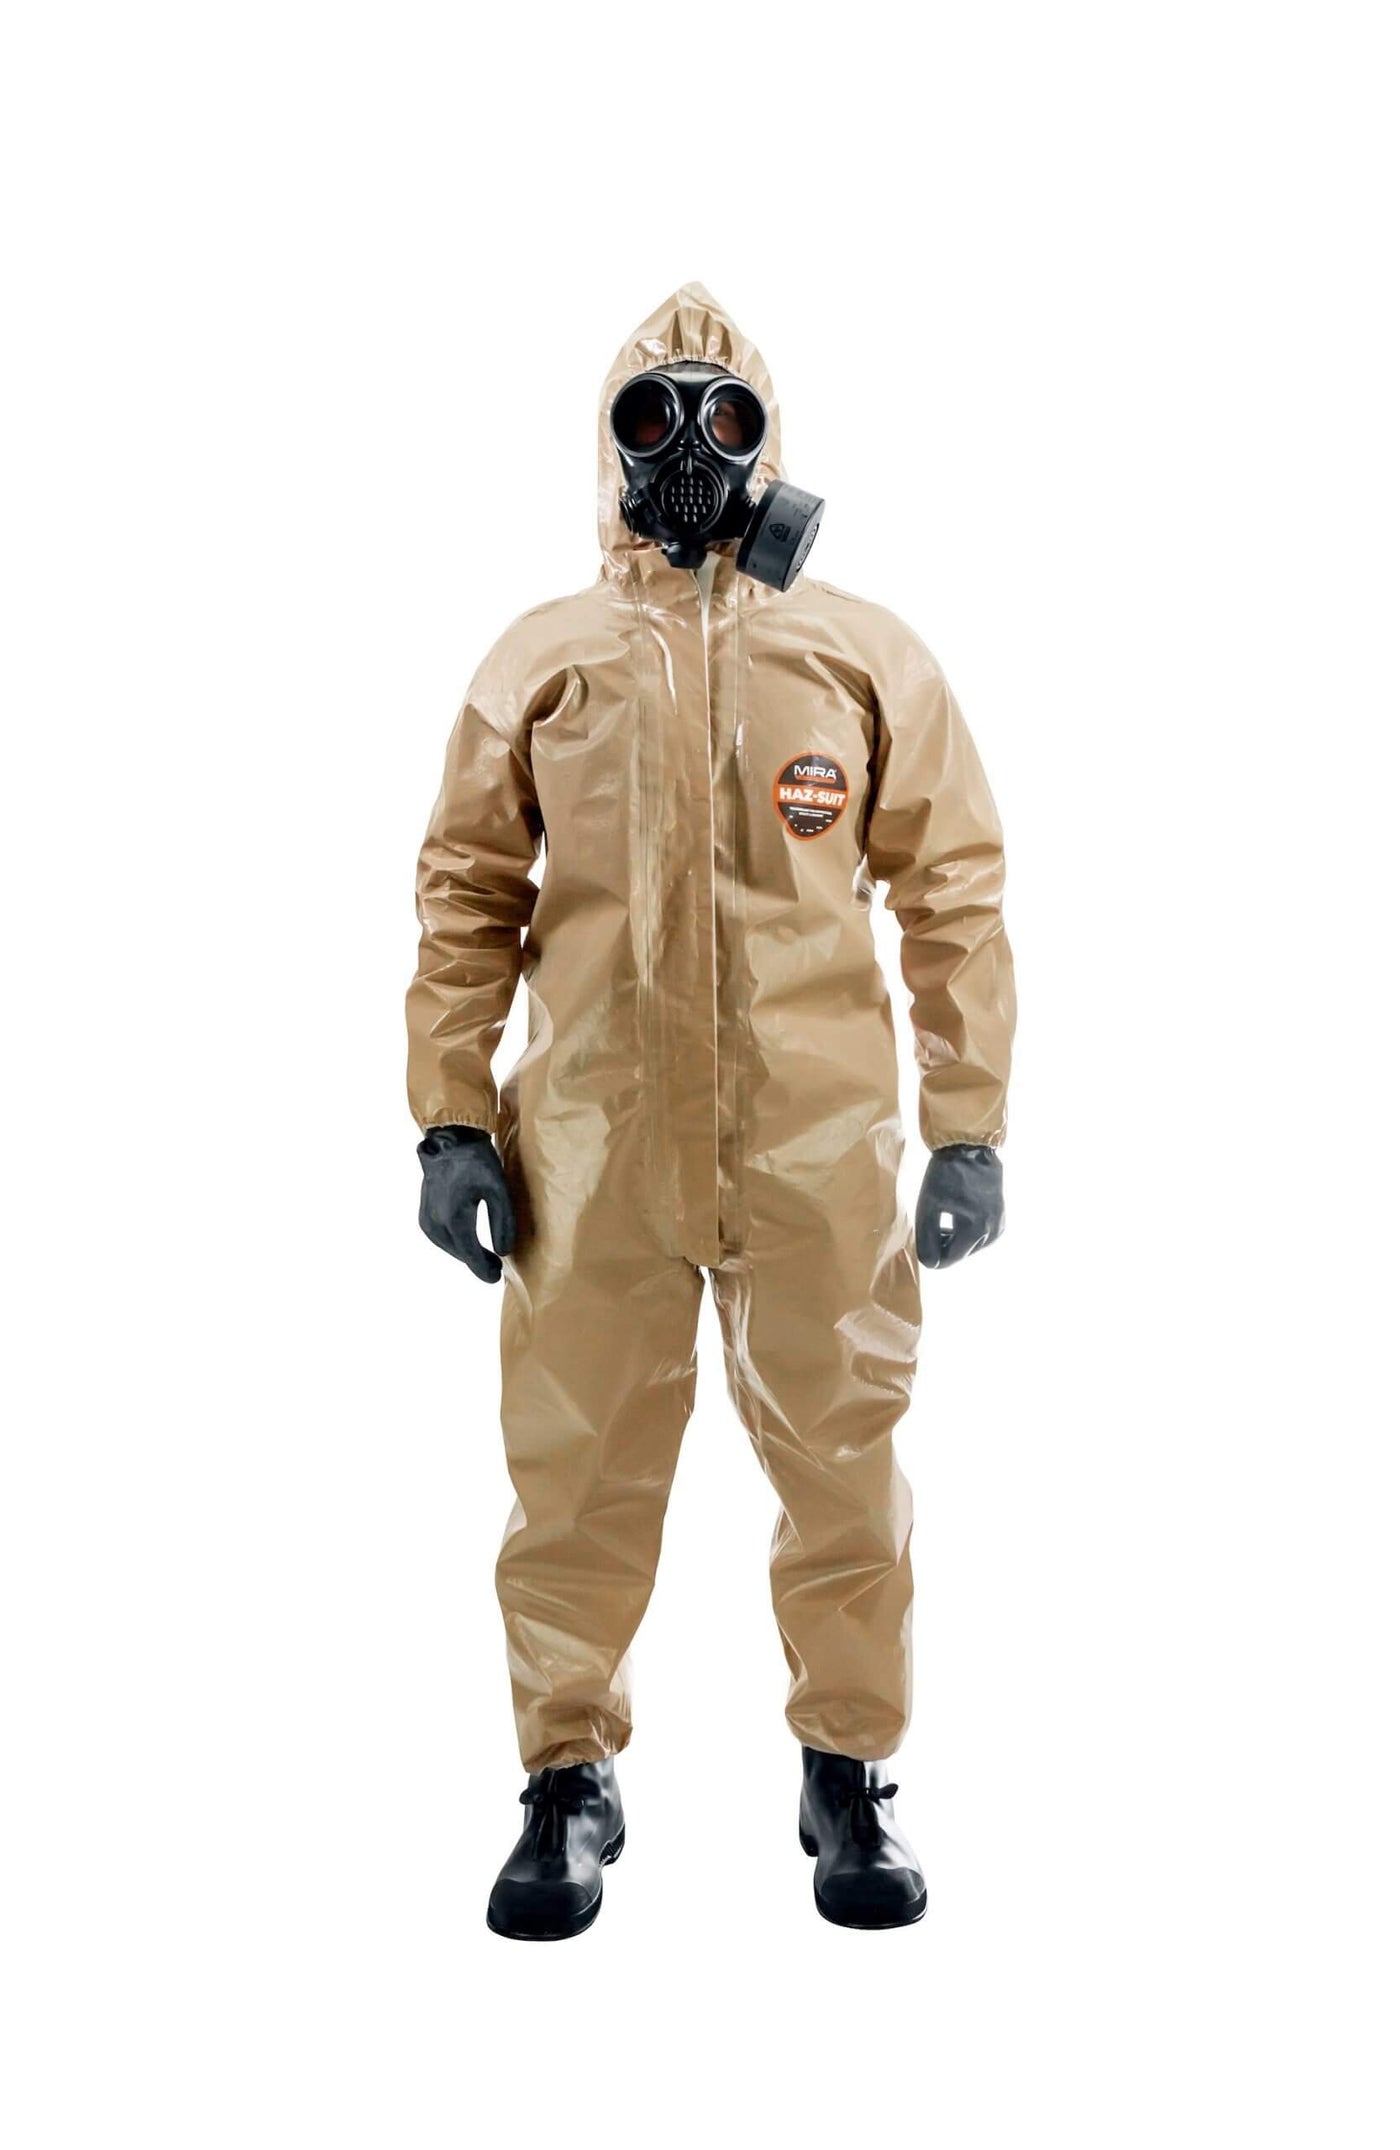 The Ultimate Guide to Hazmat Suits